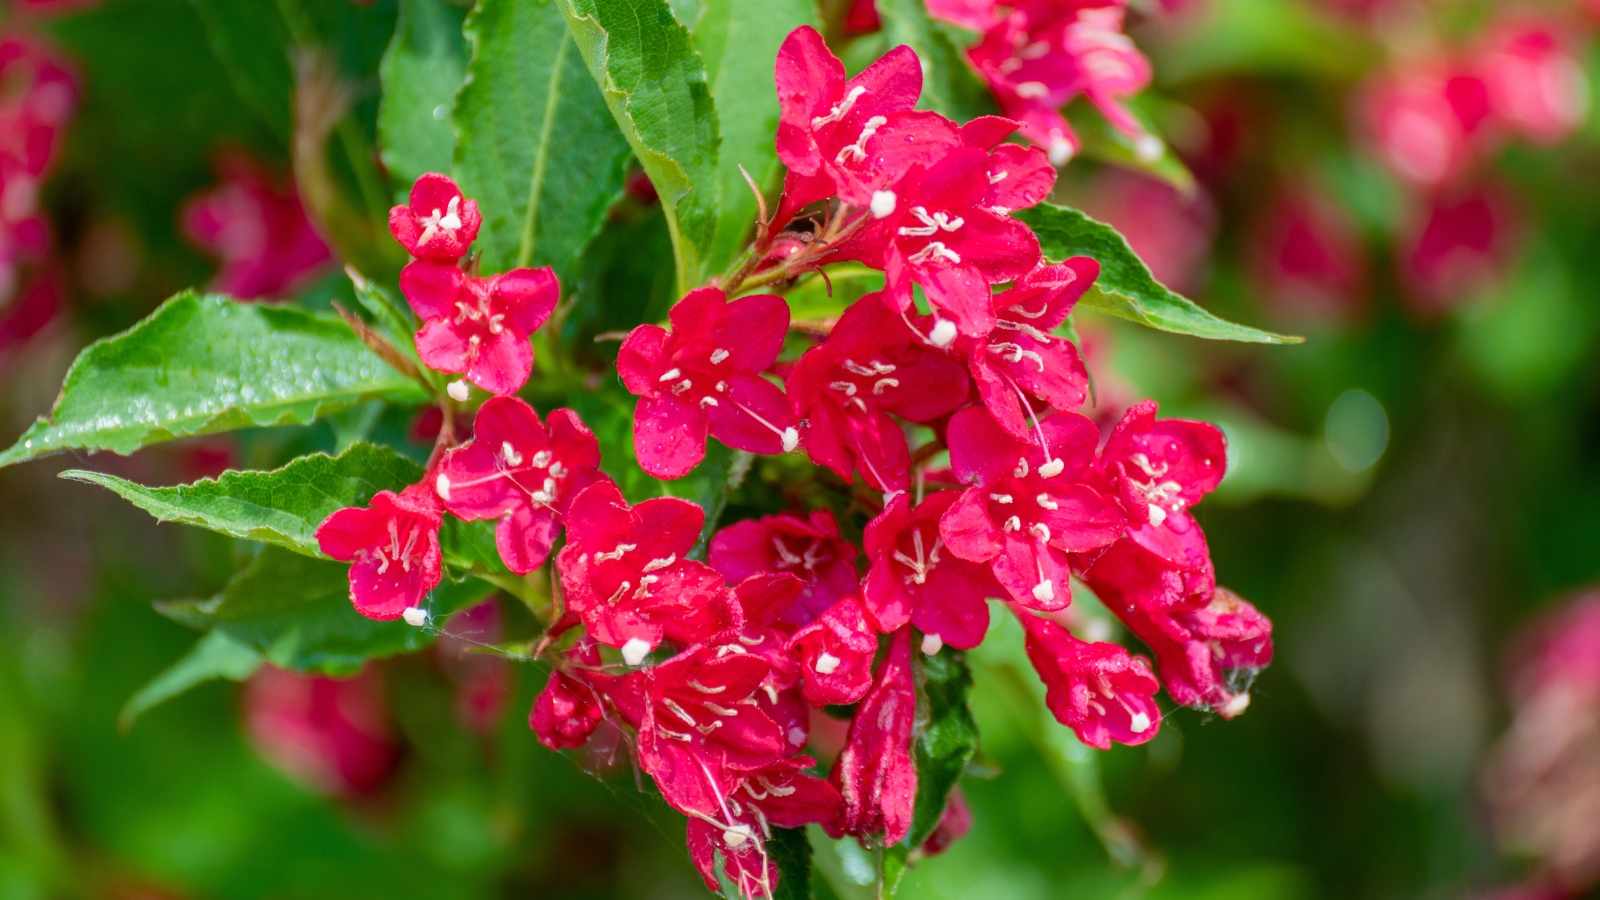  A close-up of 'Sonic Bloom Red' weigela shrub reveals vivid pink blooms nestled amidst lush green foliage, creating a striking contrast against the verdant backdrop.